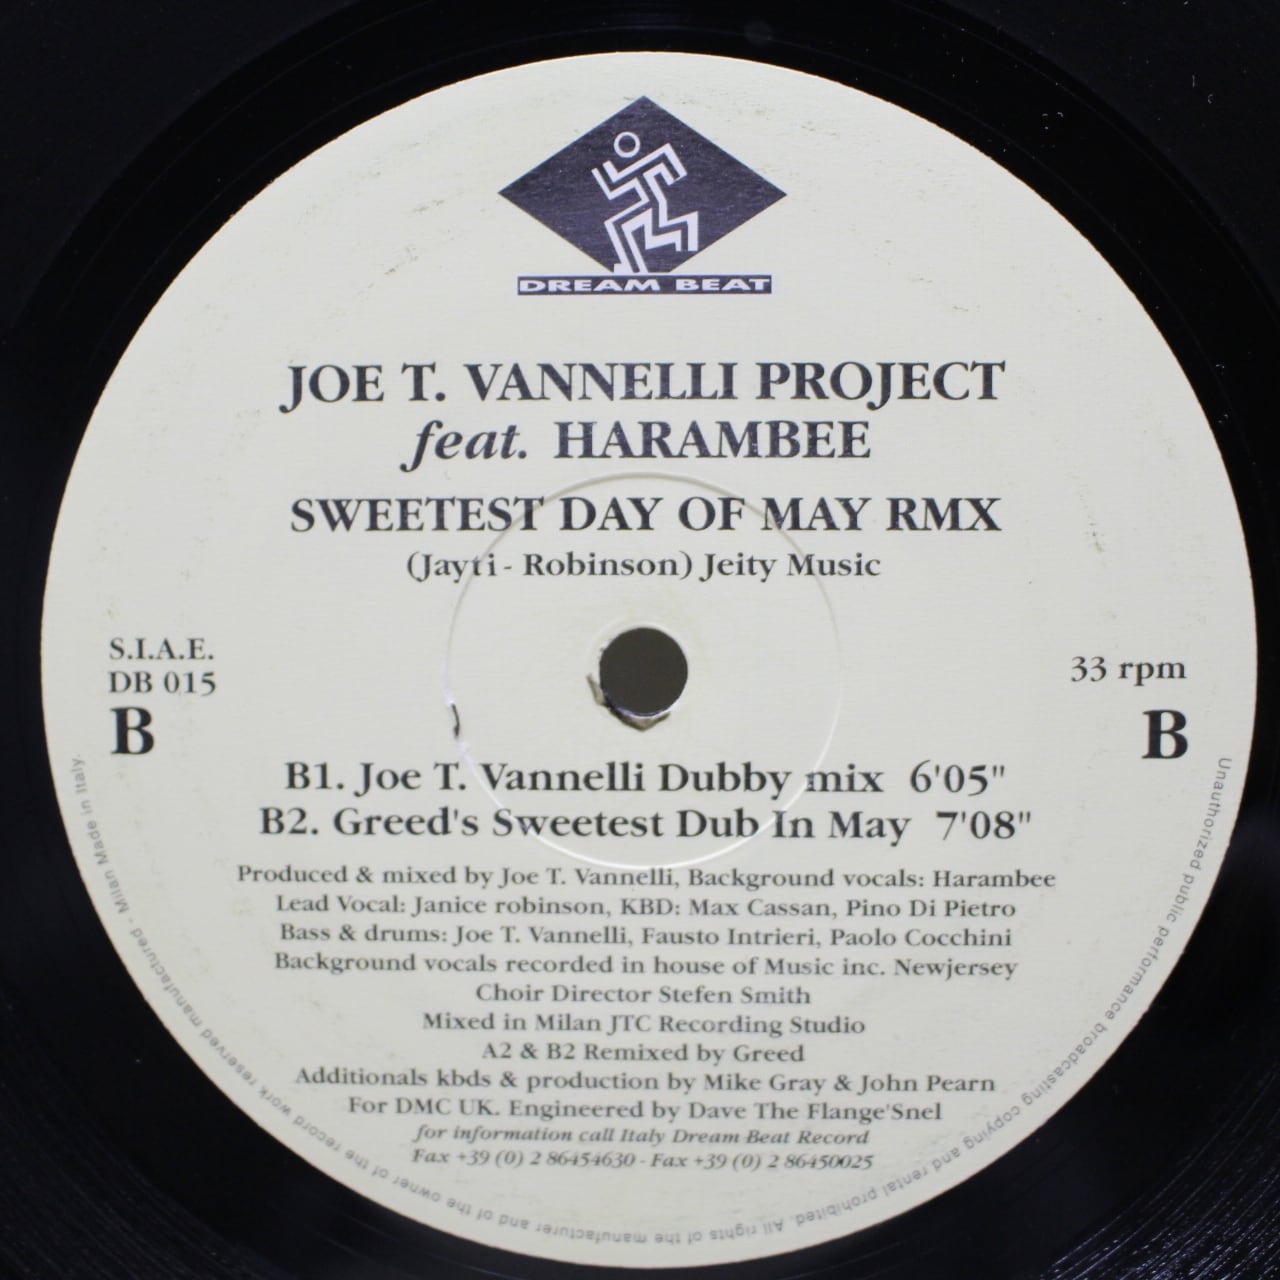 Joe T. Vannelli Project Feat. Harambee / Sweetest Day Of May RMX [DB 015] - 画像3